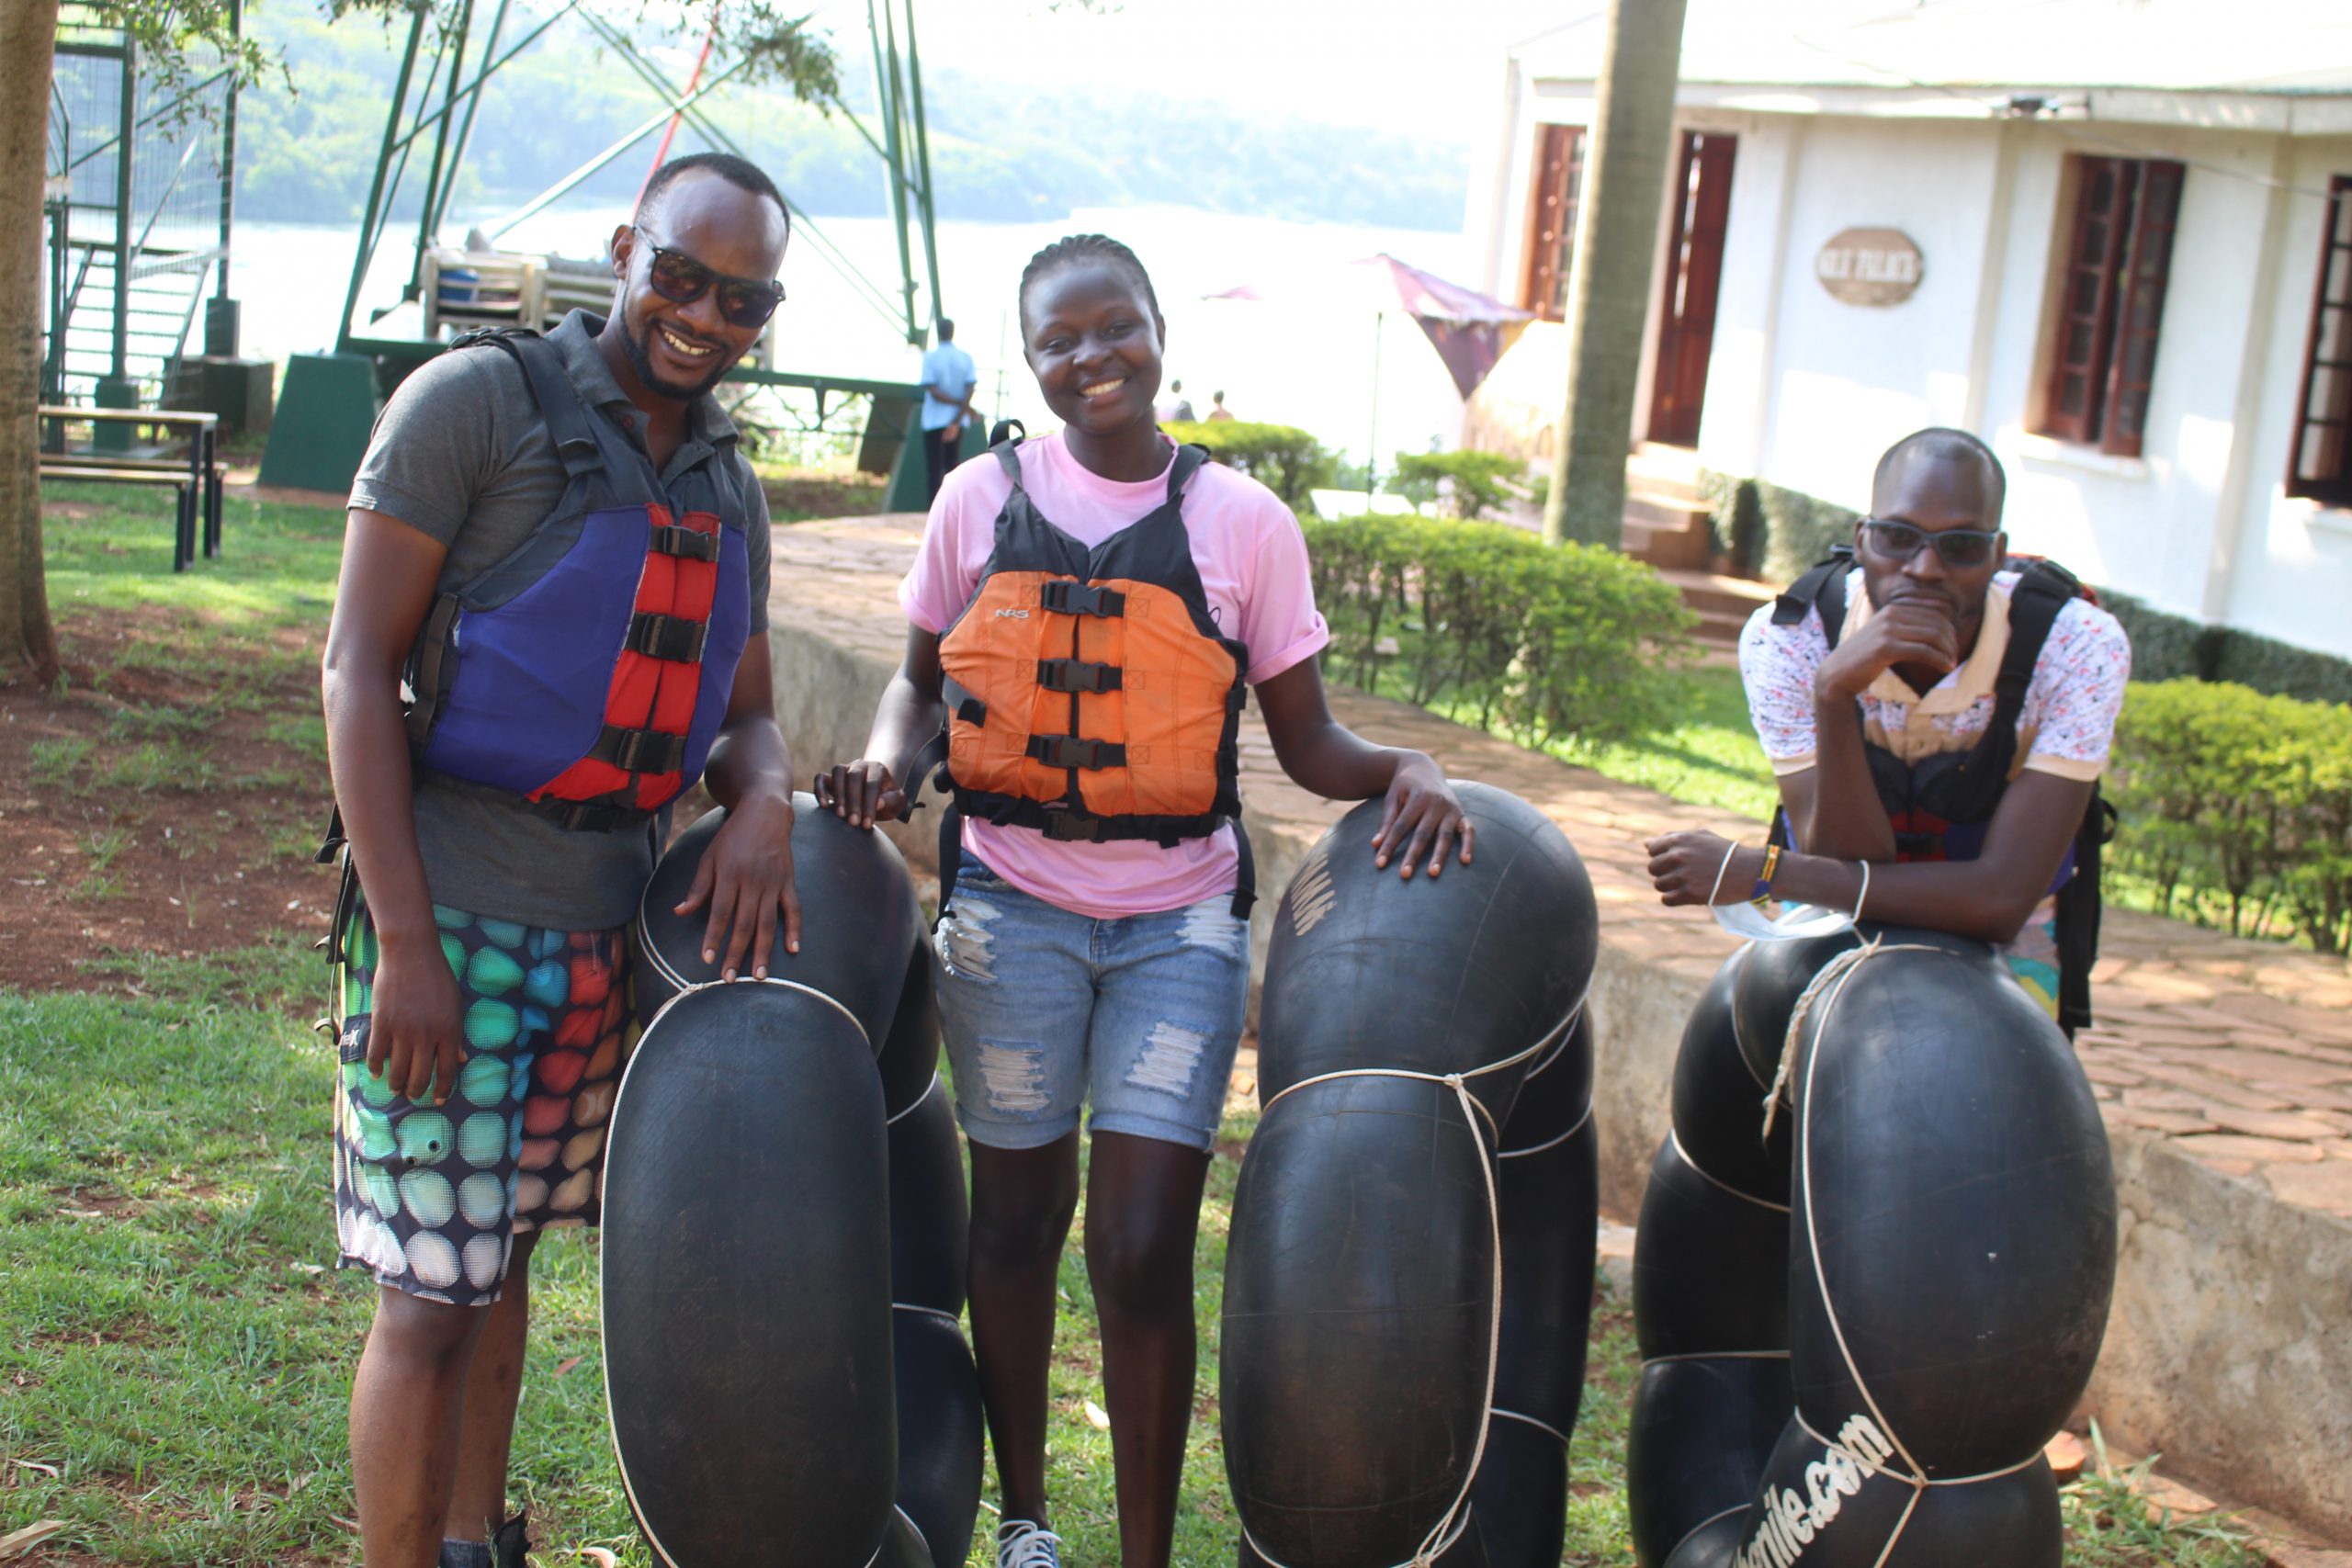 Tubing The Nile: What's the place to go in Jinja?